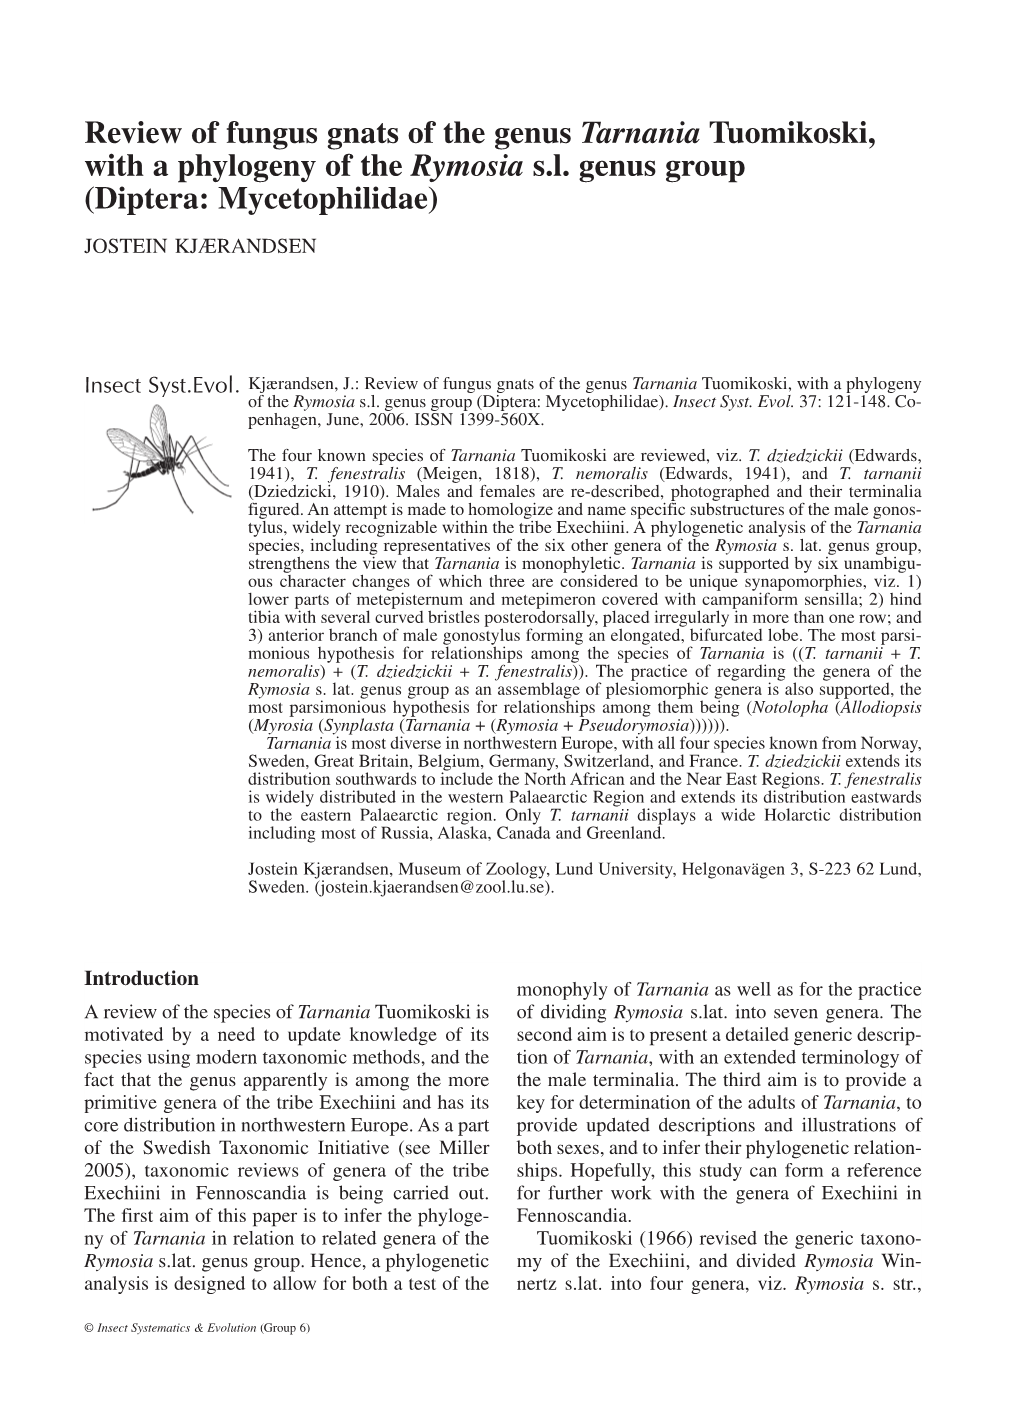 Review of Fungus Gnats of the Genus Tarnania Tuomikoski, with a Phylogeny of the Rymosia S.L